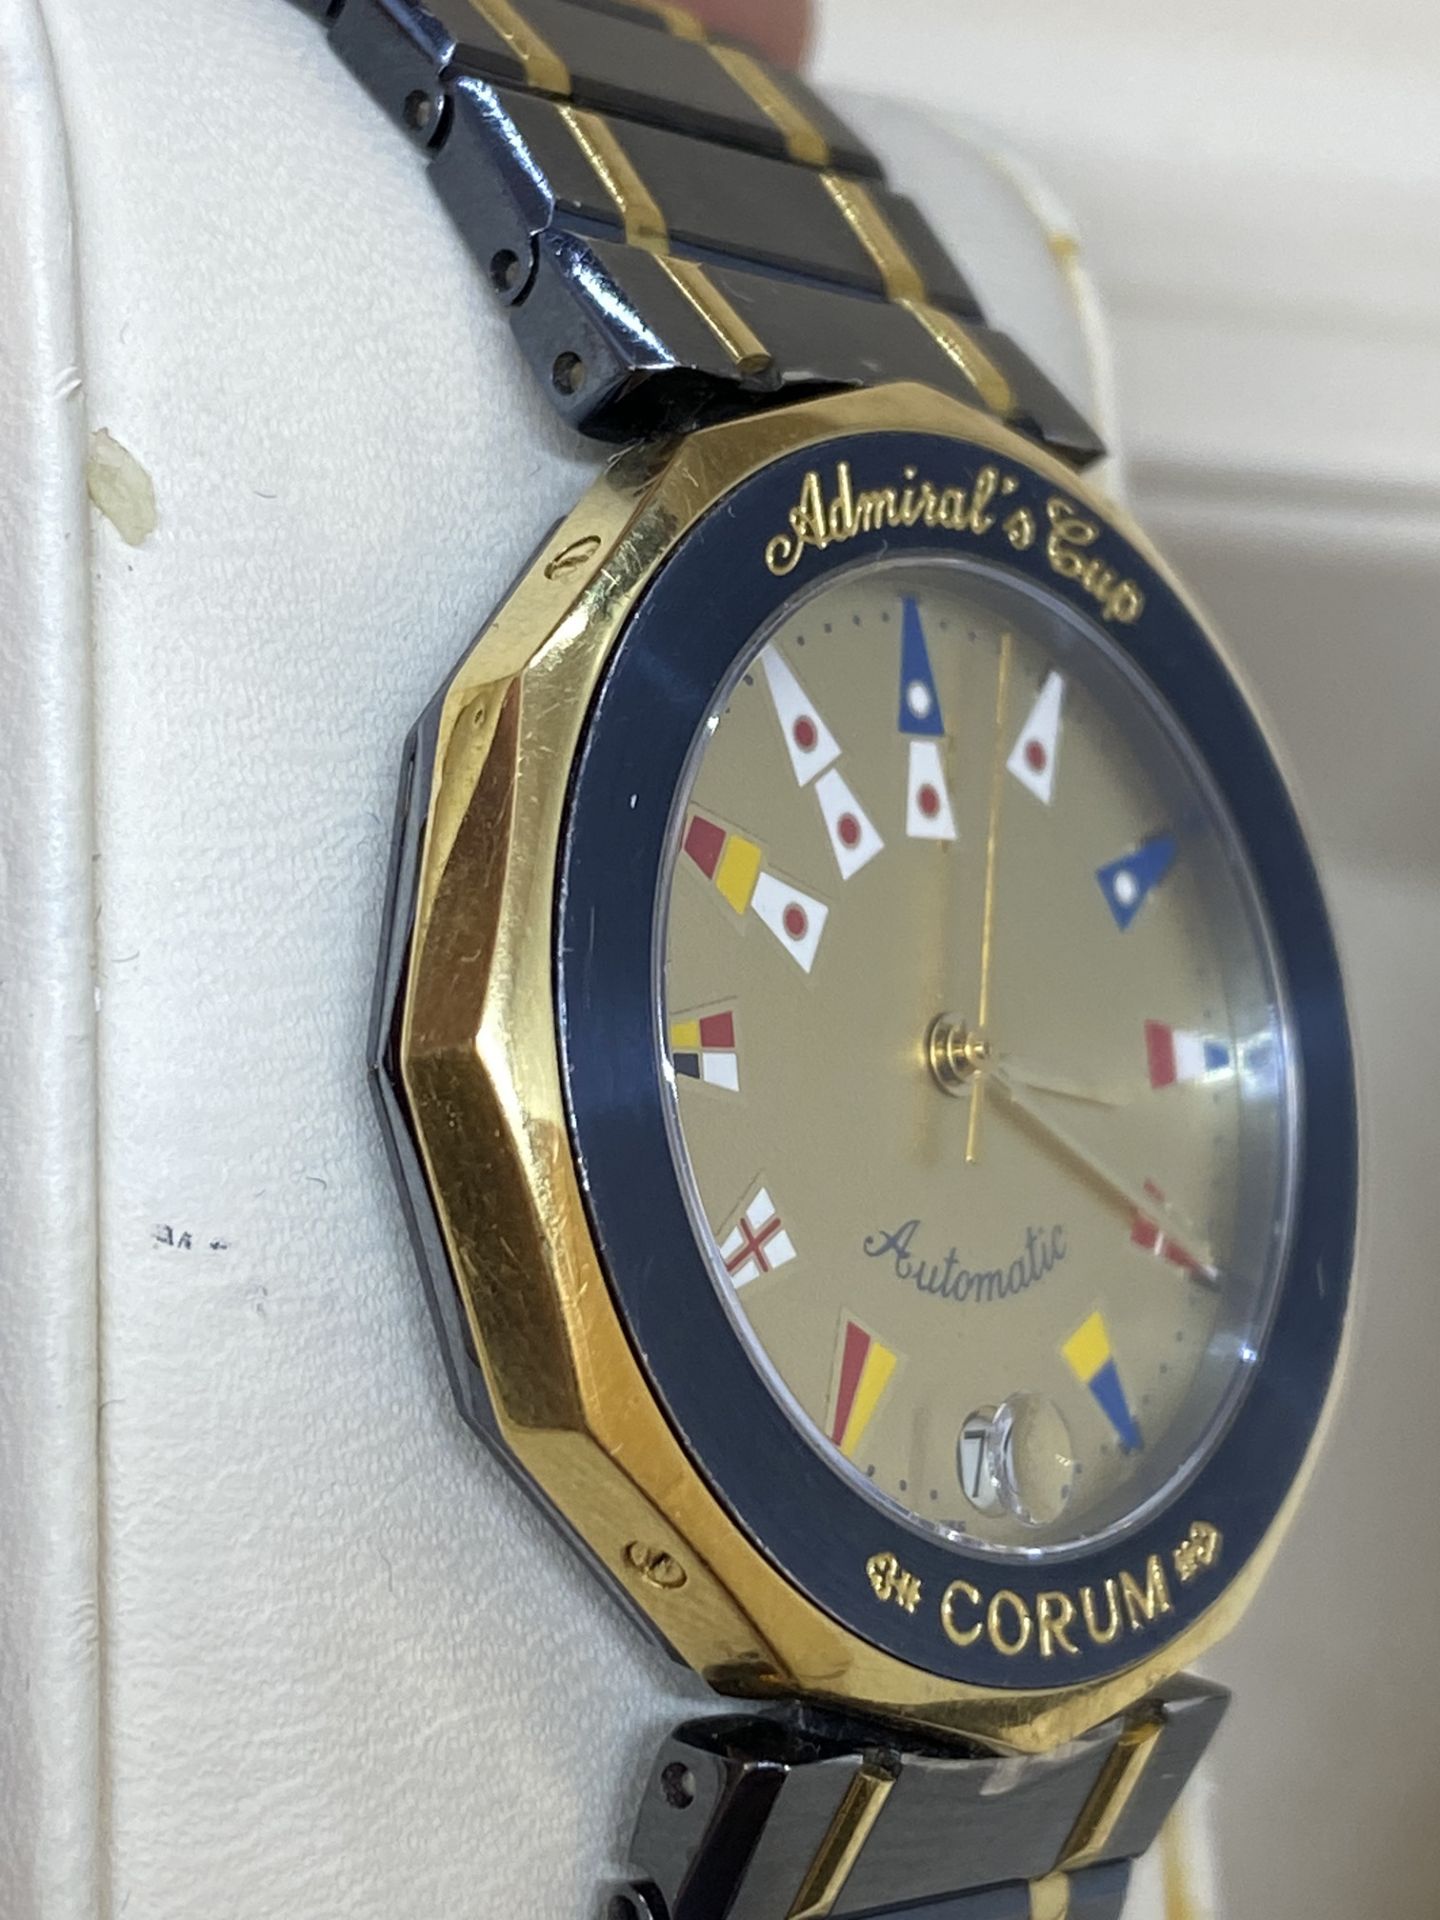 CORUM ADMIRALS CUP 18ct GOLD & S/STEEL AUTOMATIC WATCH - Image 6 of 13